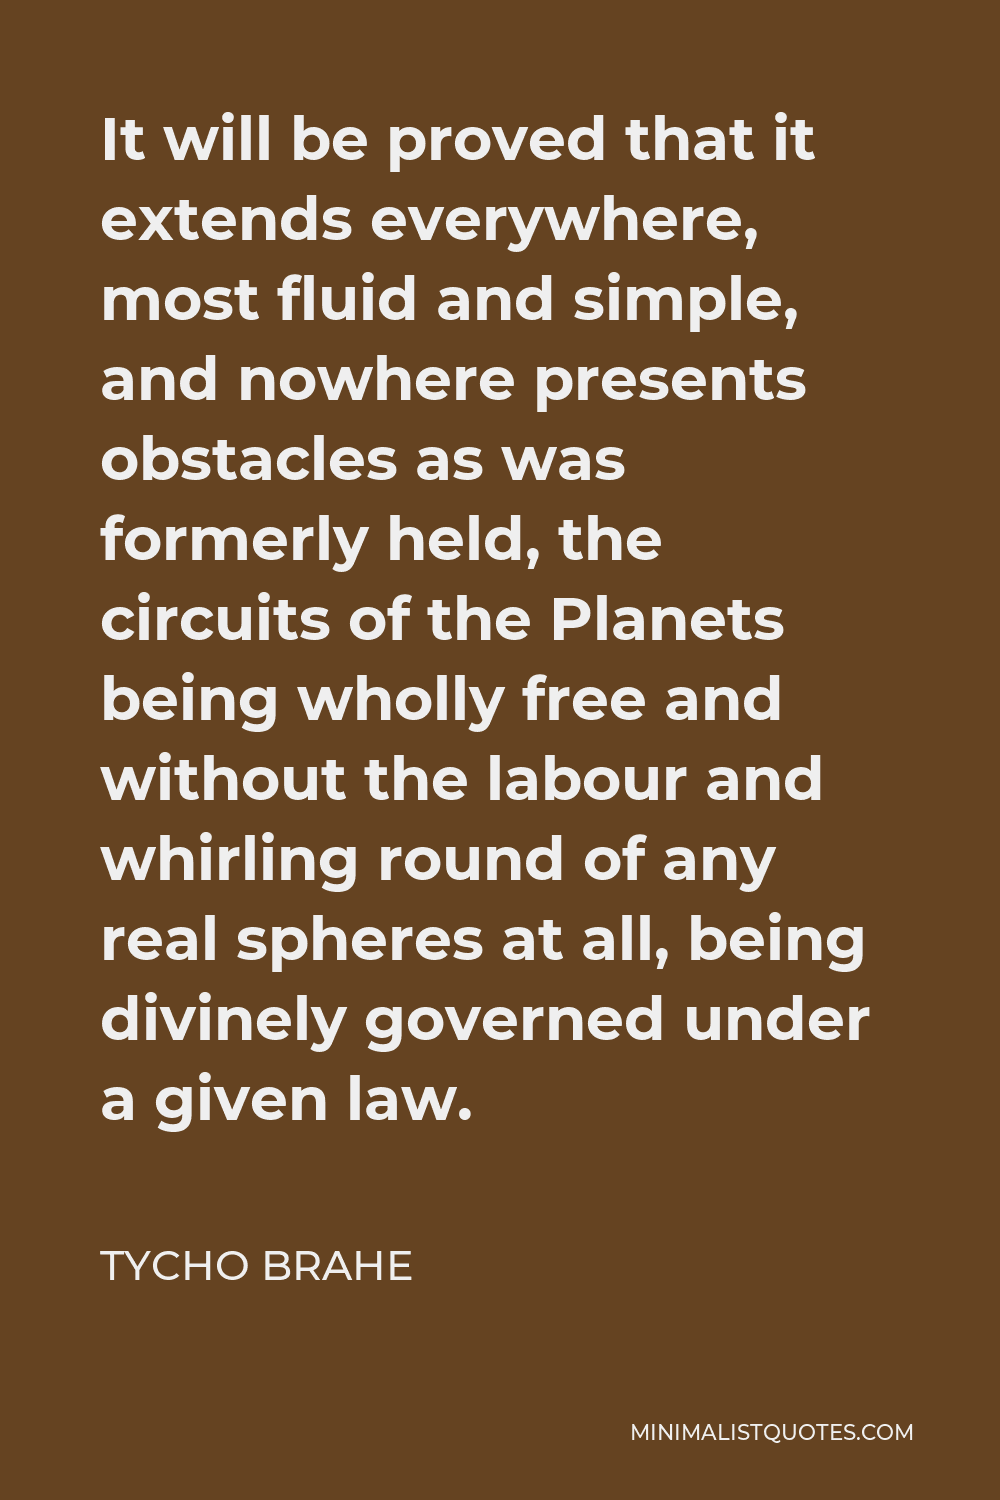 Tycho Brahe Quote - It will be proved that it extends everywhere, most fluid and simple, and nowhere presents obstacles as was formerly held, the circuits of the Planets being wholly free and without the labour and whirling round of any real spheres at all, being divinely governed under a given law.